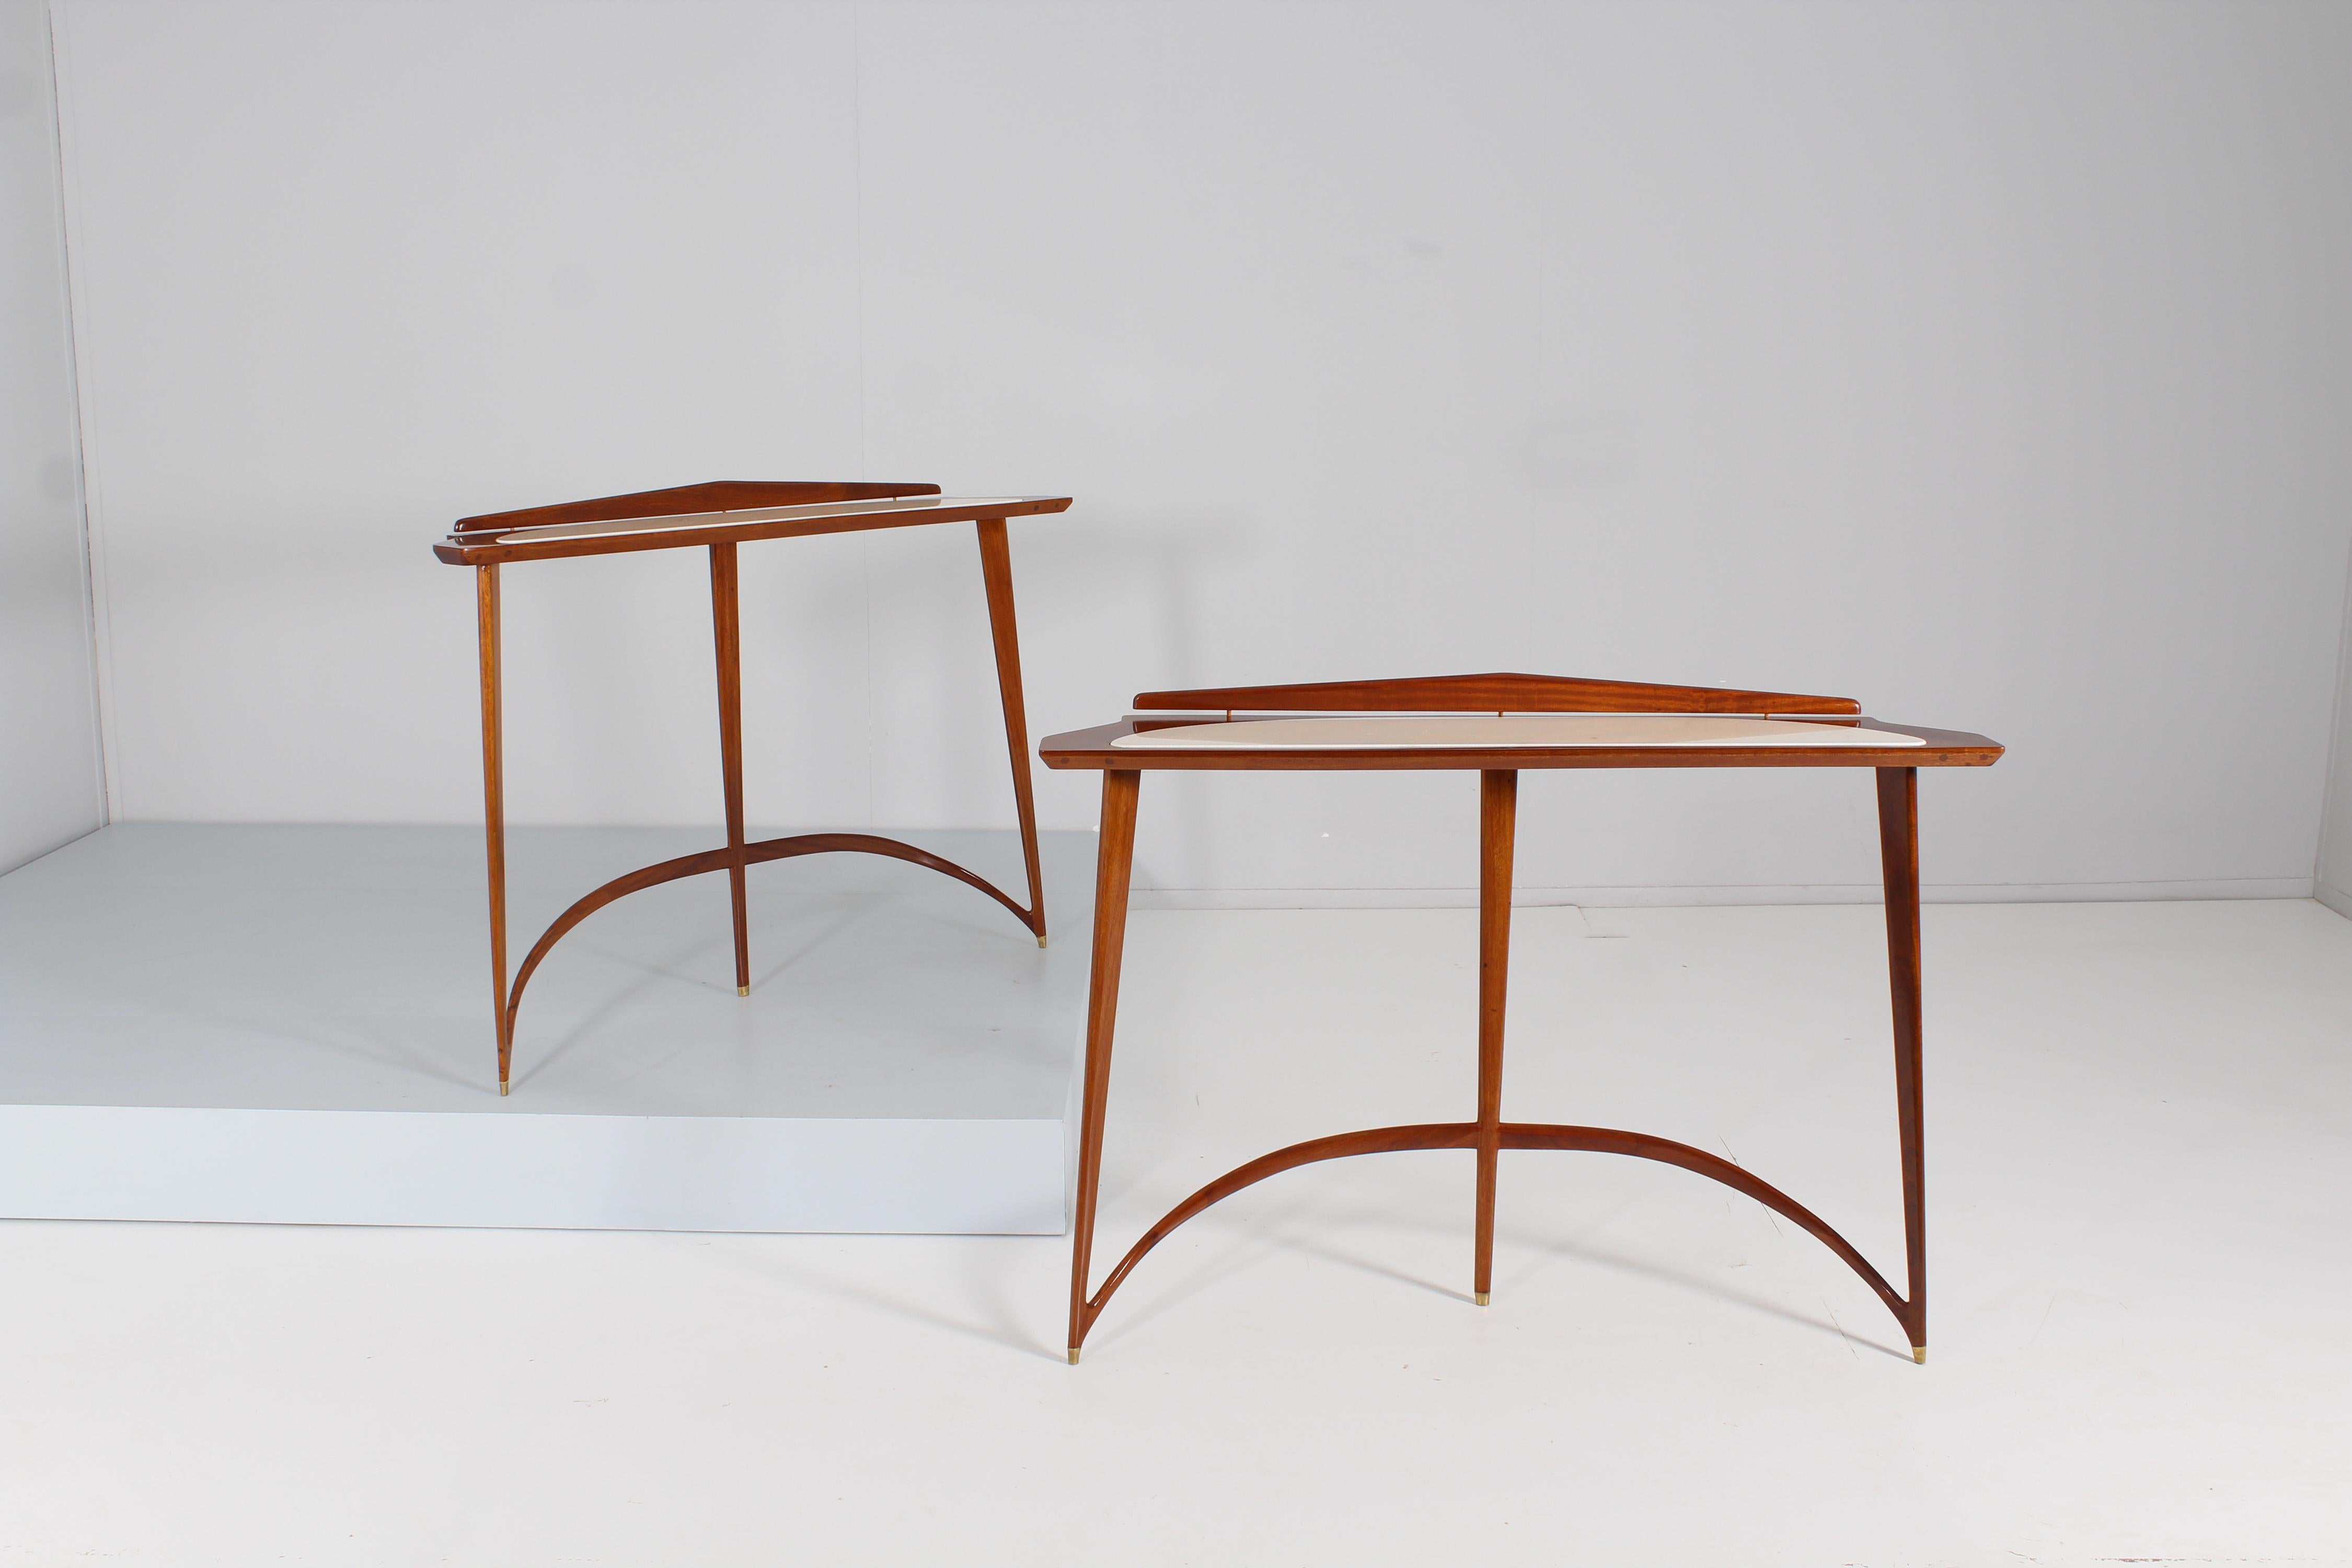 Rare pair of consoles with splendid curved lines in wood with golden brass finishes and white marble top and spiked feet, finement restored. By Enrico Rava, Italy in the 1950s.
Wear consistent with age and use.